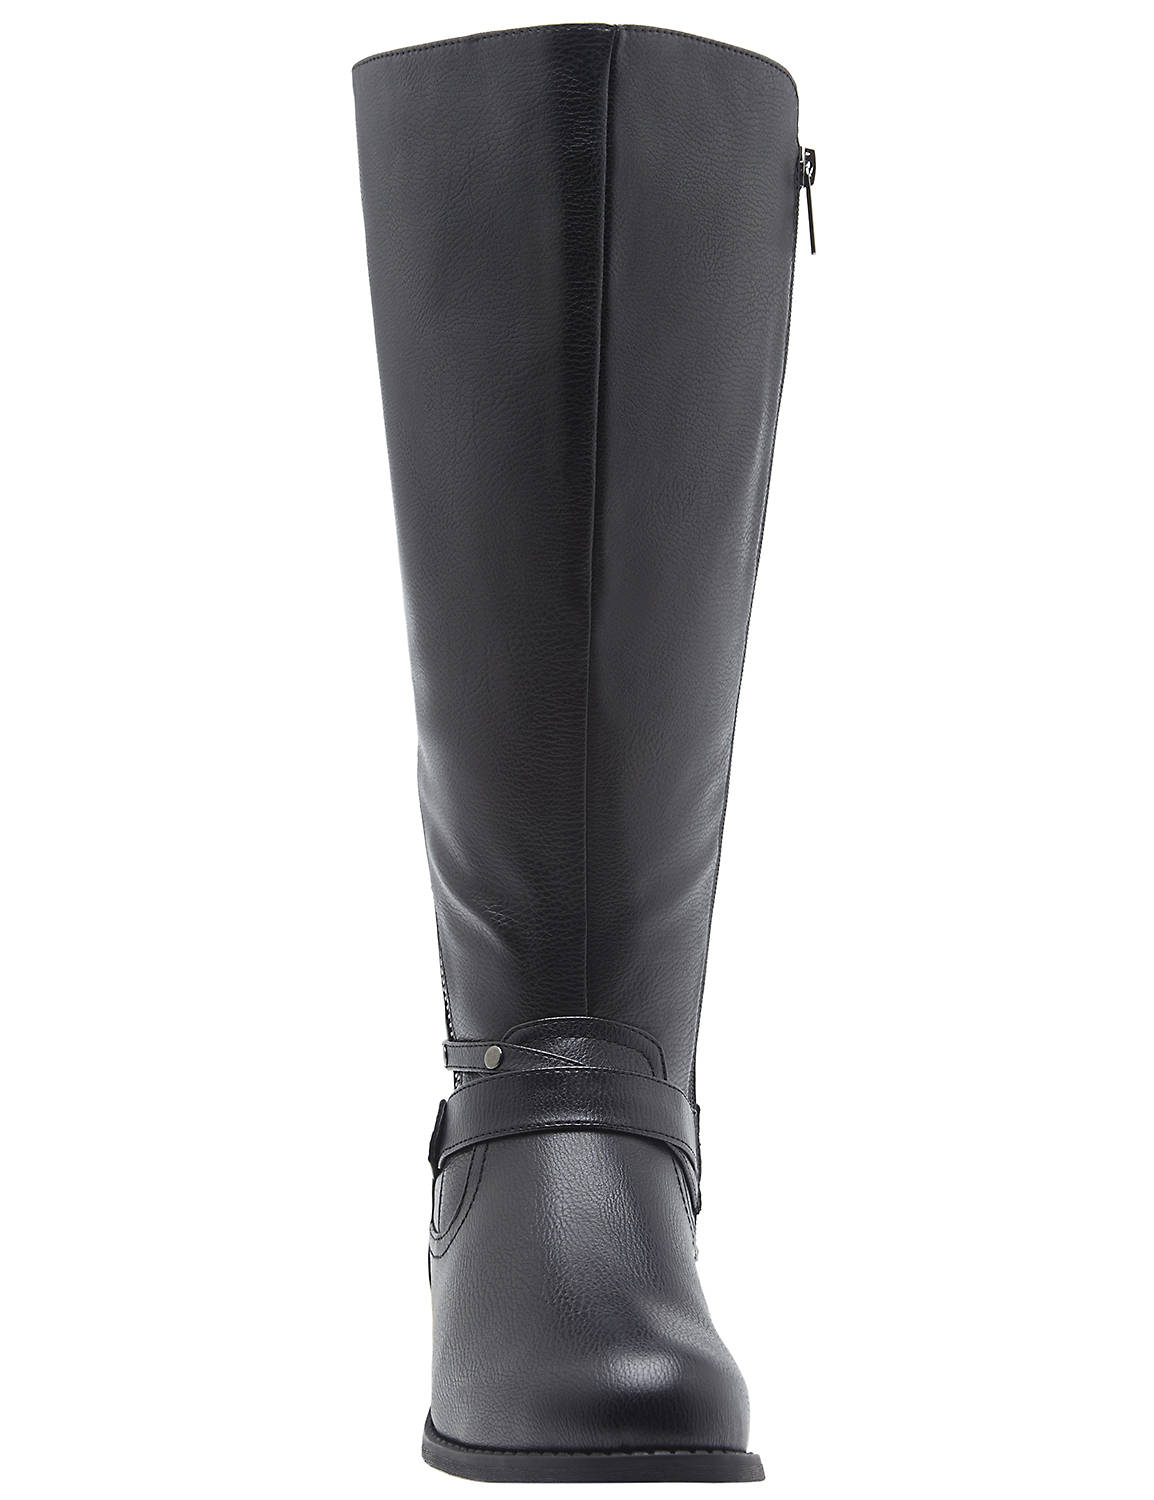 ZIPPER DETAIL RIDING BOOT Product Image 4